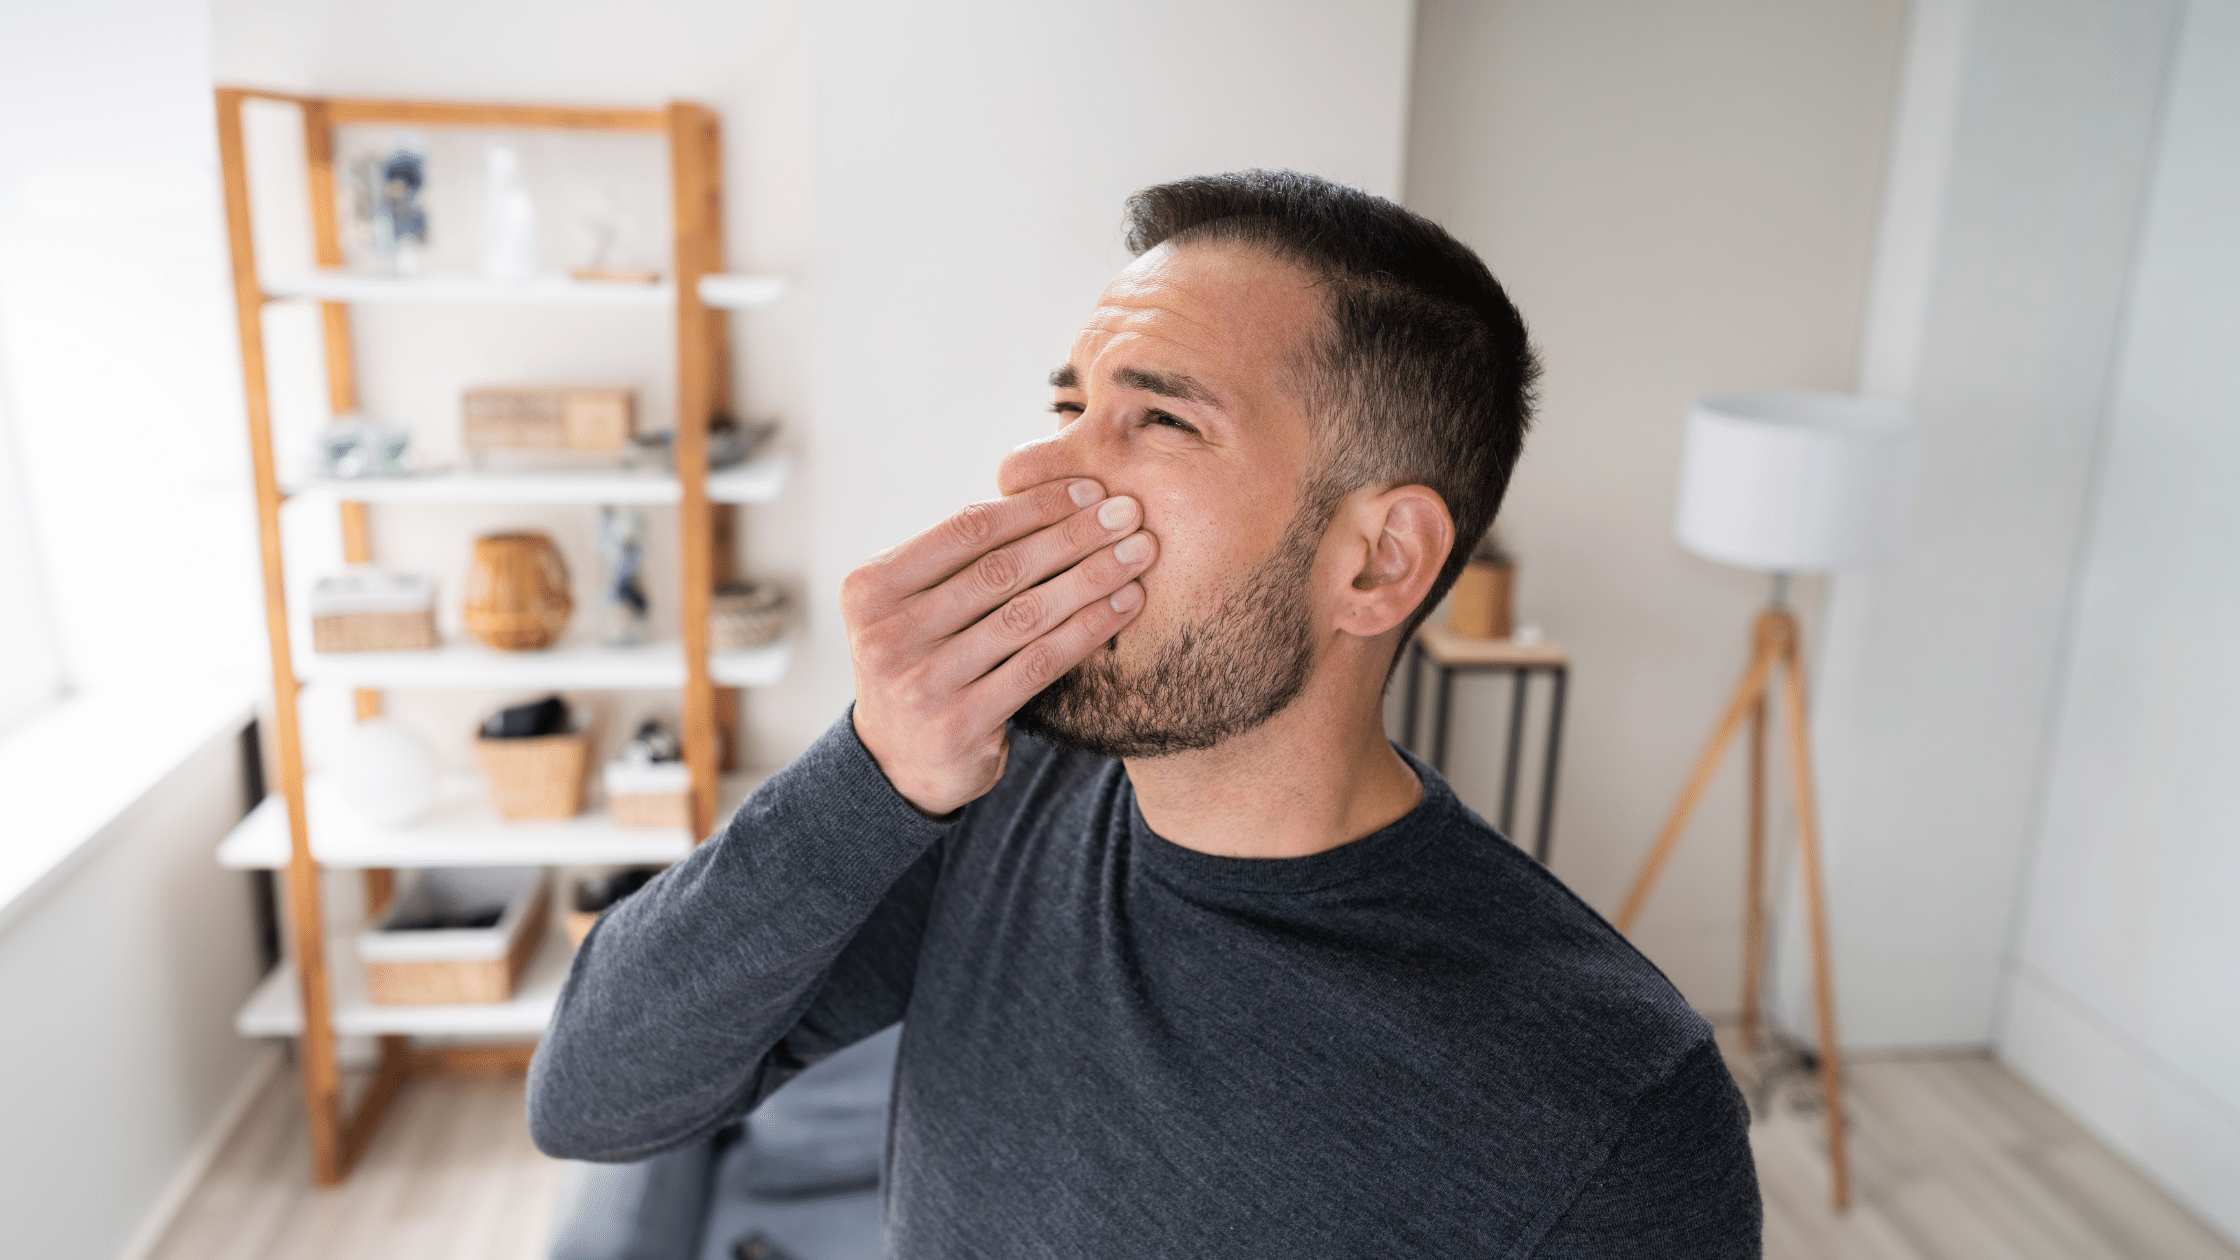 Man pinching his nose due to a bad smell